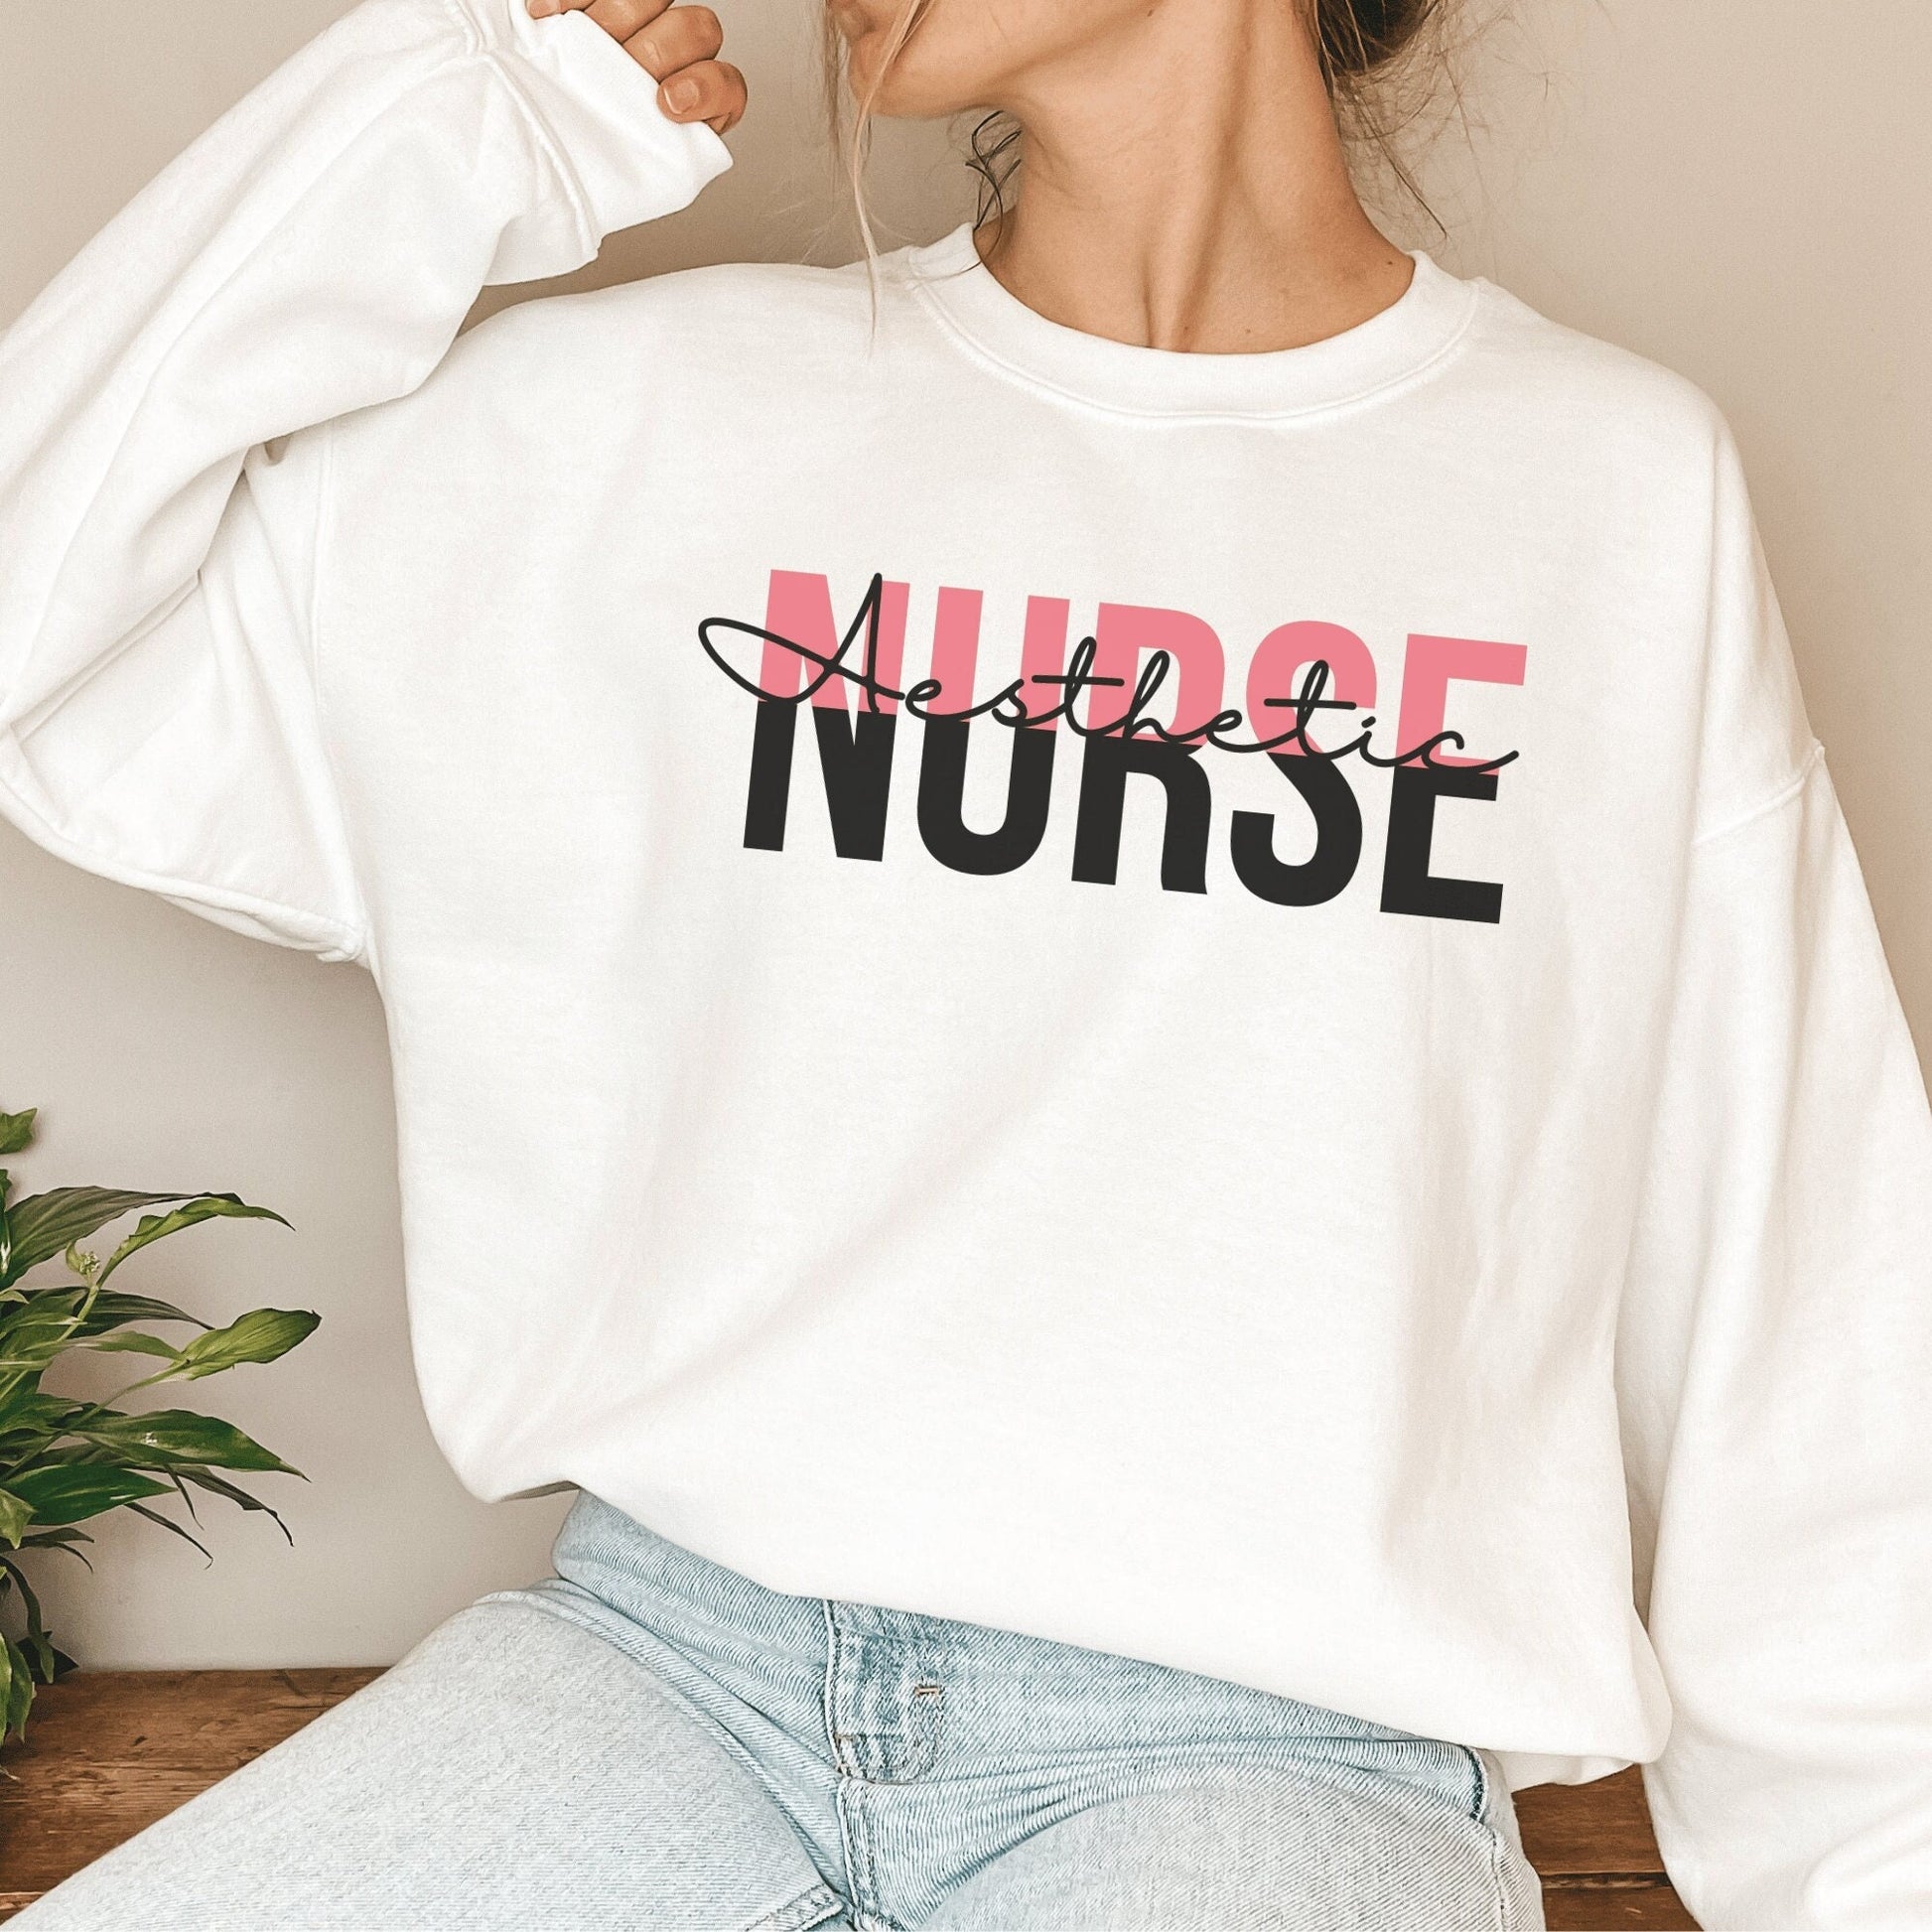 Aesthetic Nurse is a white unisex sweatshirt on a female model with the design in pink and black lettering that says Aesthetic Nurse. Aesthetic is in black cursive lettering and layered on top of the word nurse, which is in capital letters that are pink and black.